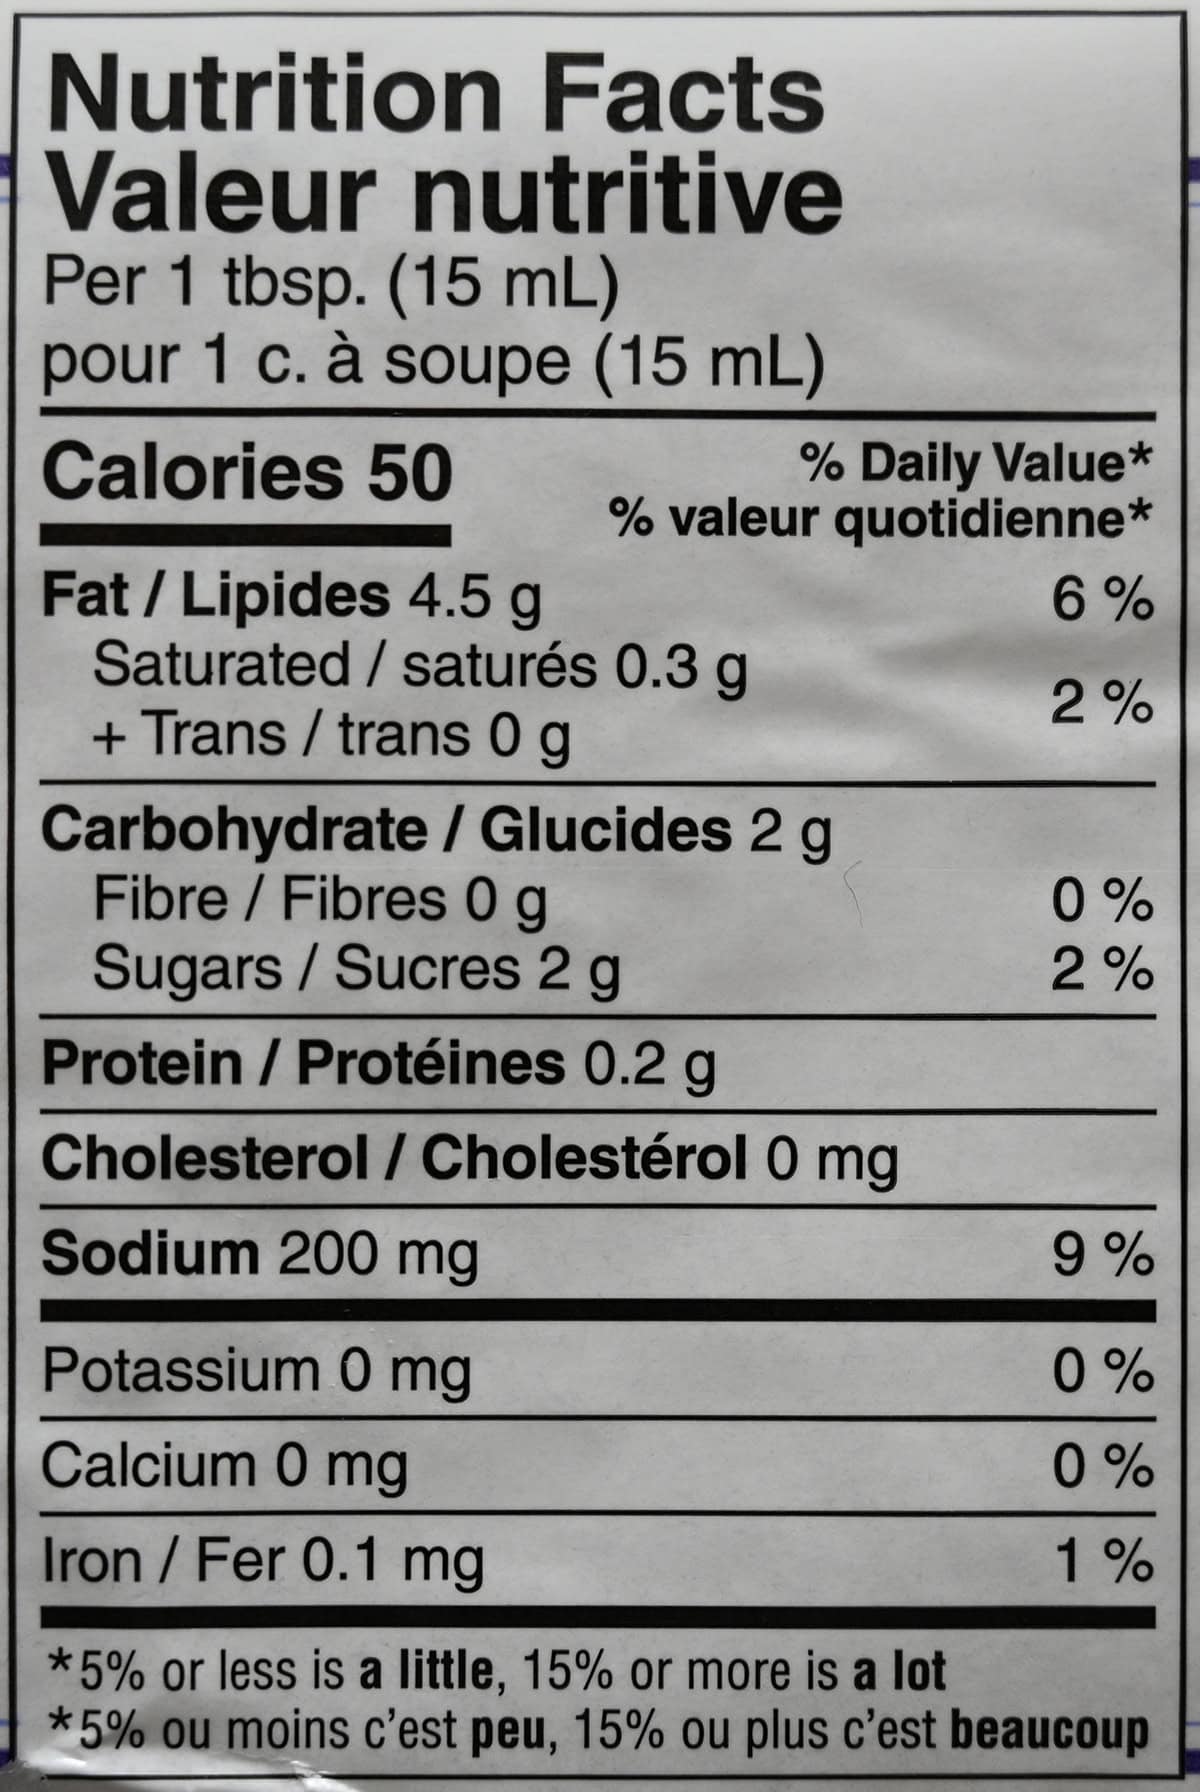 Image of the nutrition facts for the salad from the back of the bottle.